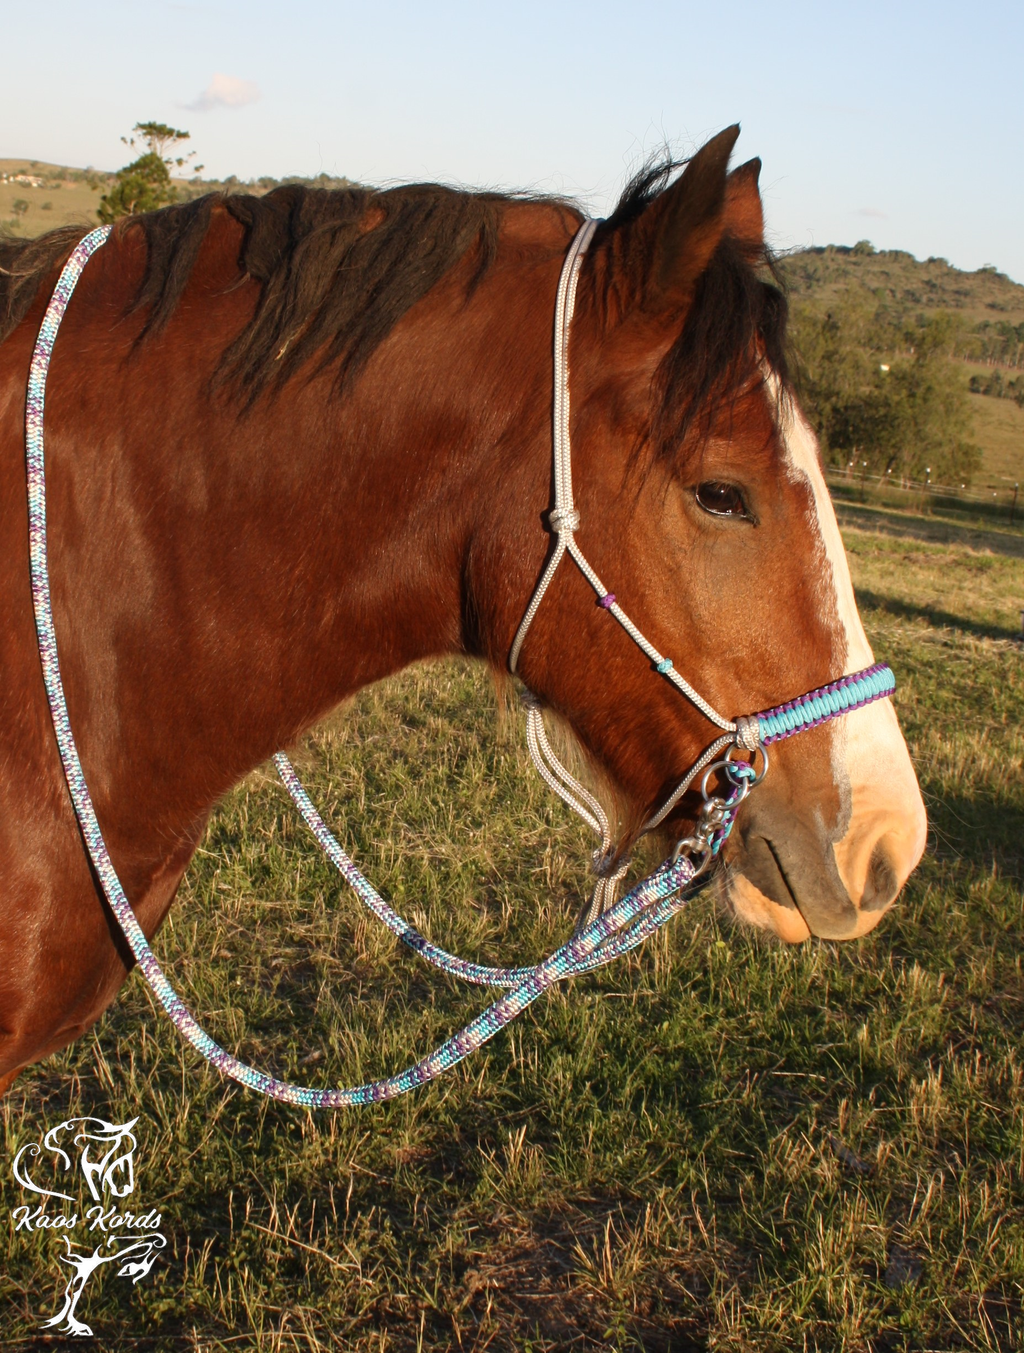 Bitless Bridle With Flat Braid and No Browband